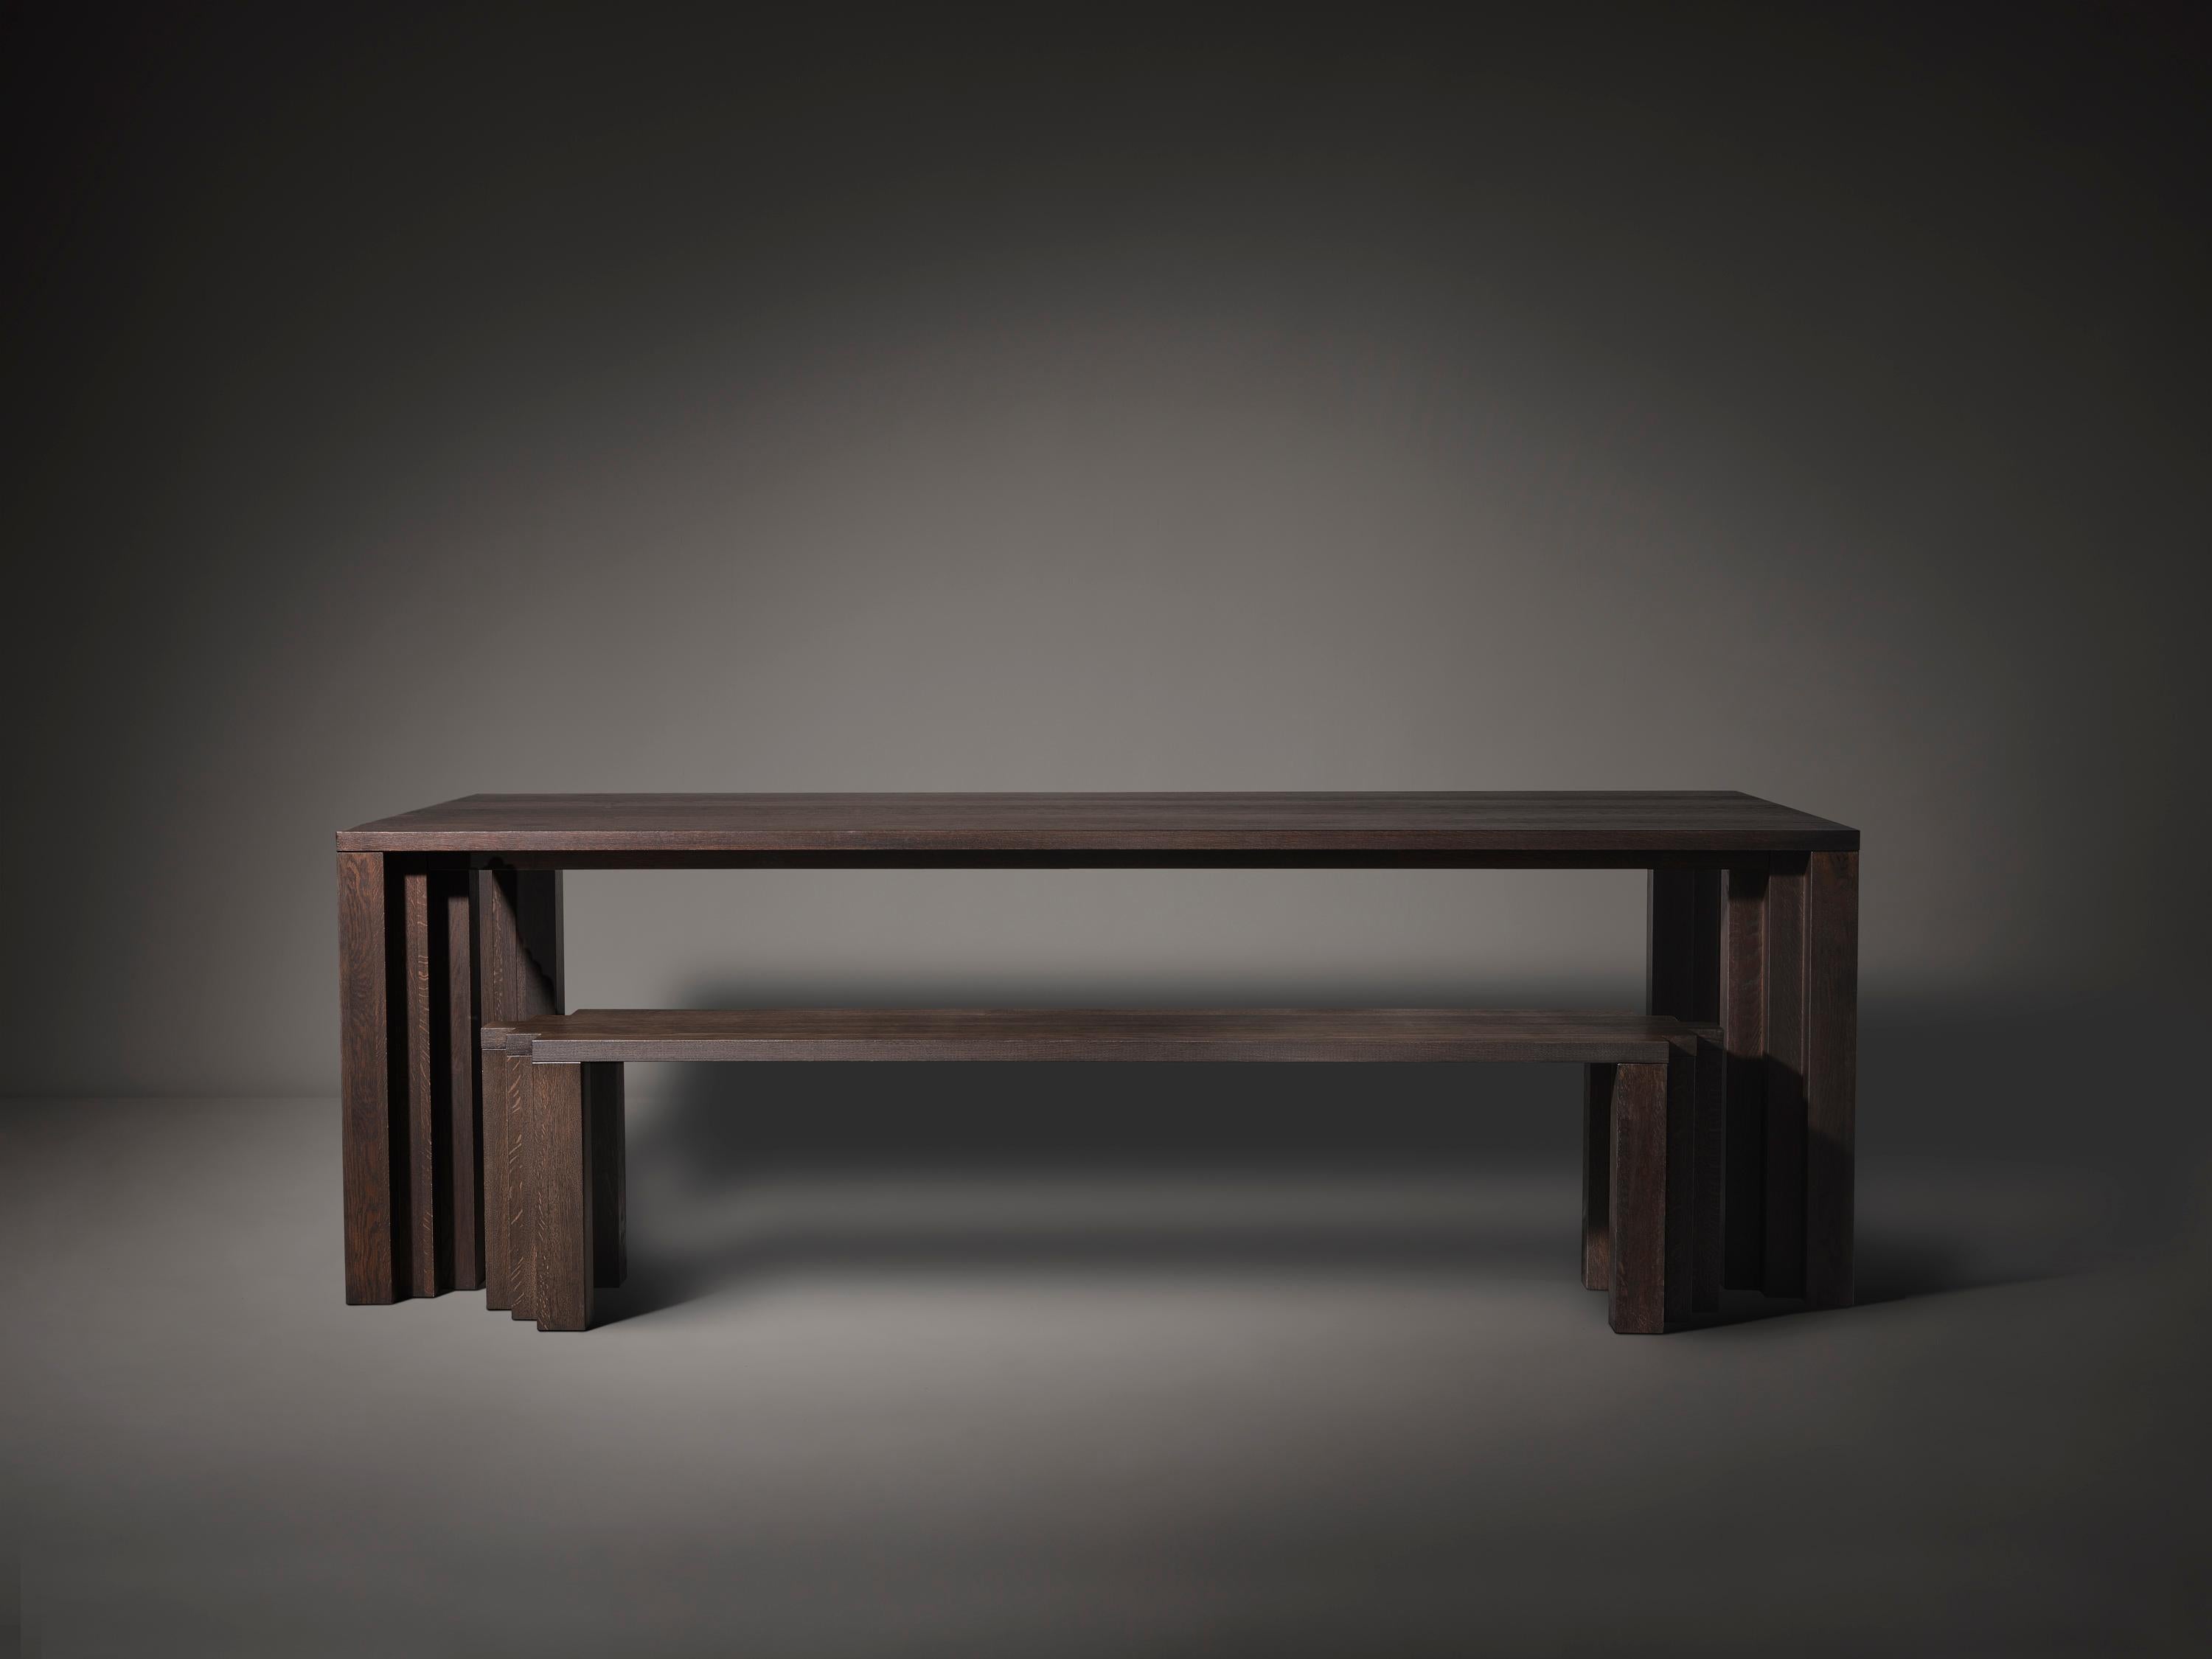 Hand-Crafted Modernist Solid Oak Wooden Cadence Bench For Sale